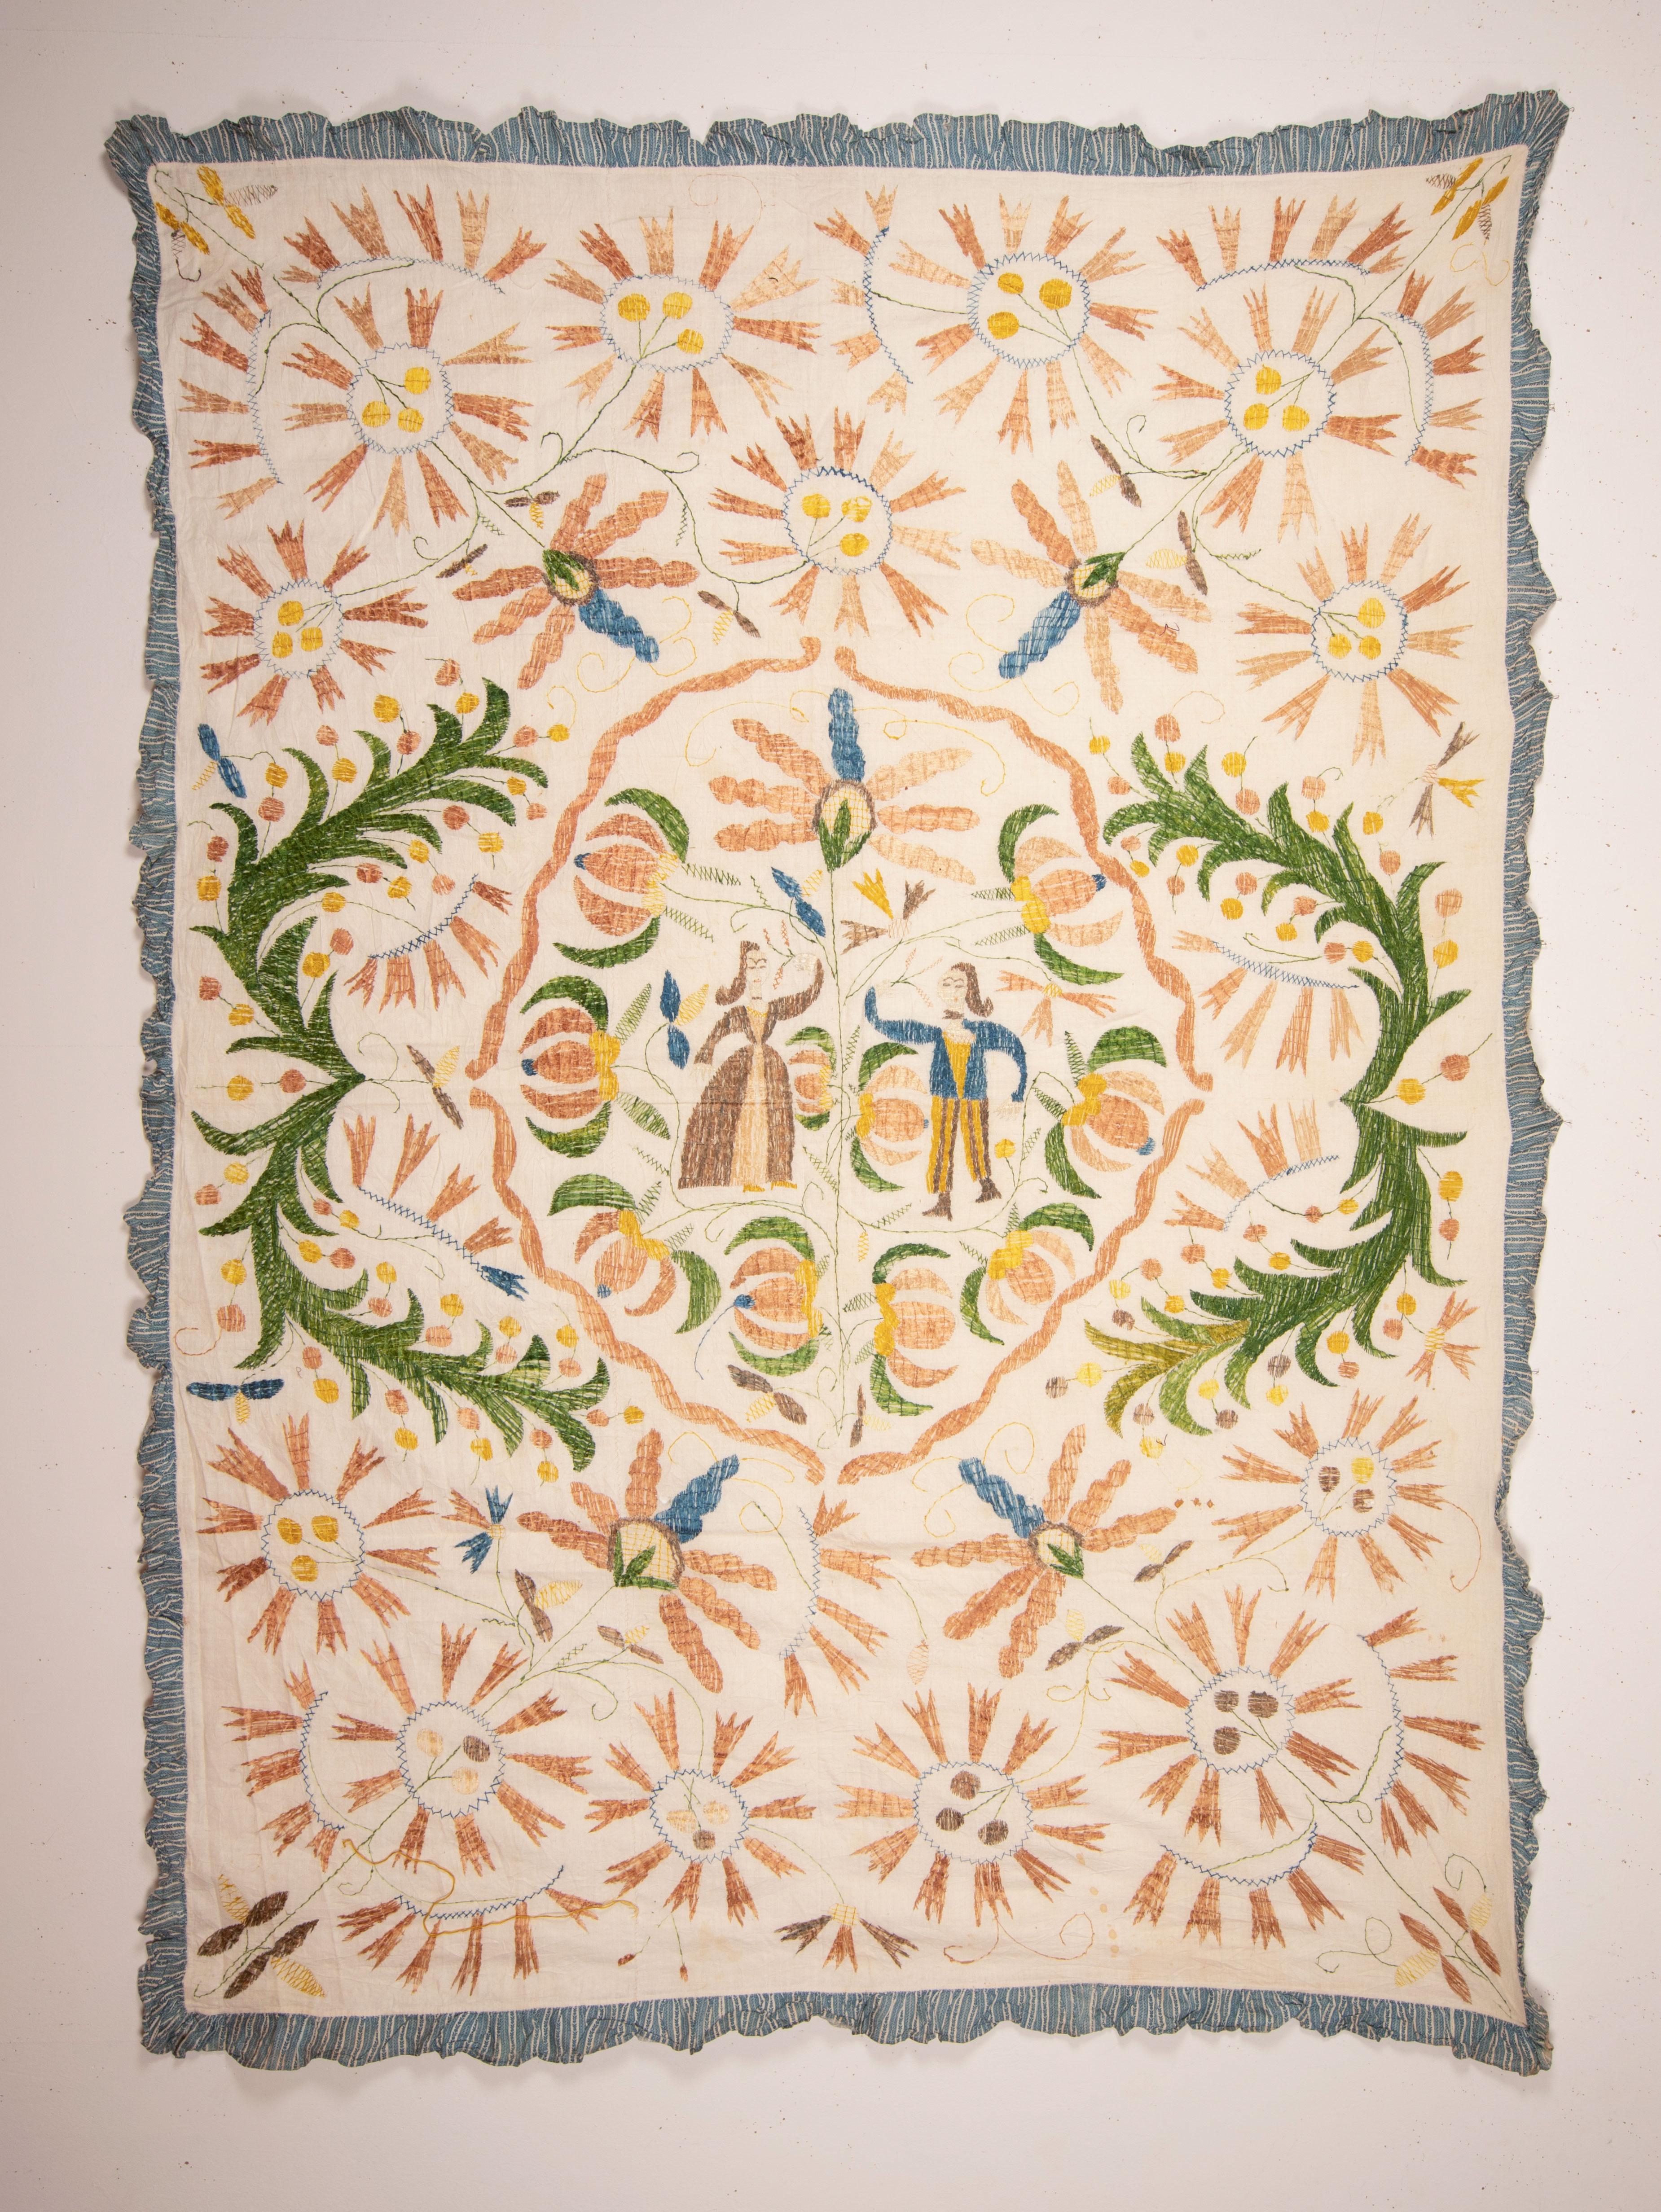 This is a 19th C. Castello Branco embroidery from Portugal. Silk Embroidery on a cotton foundation.